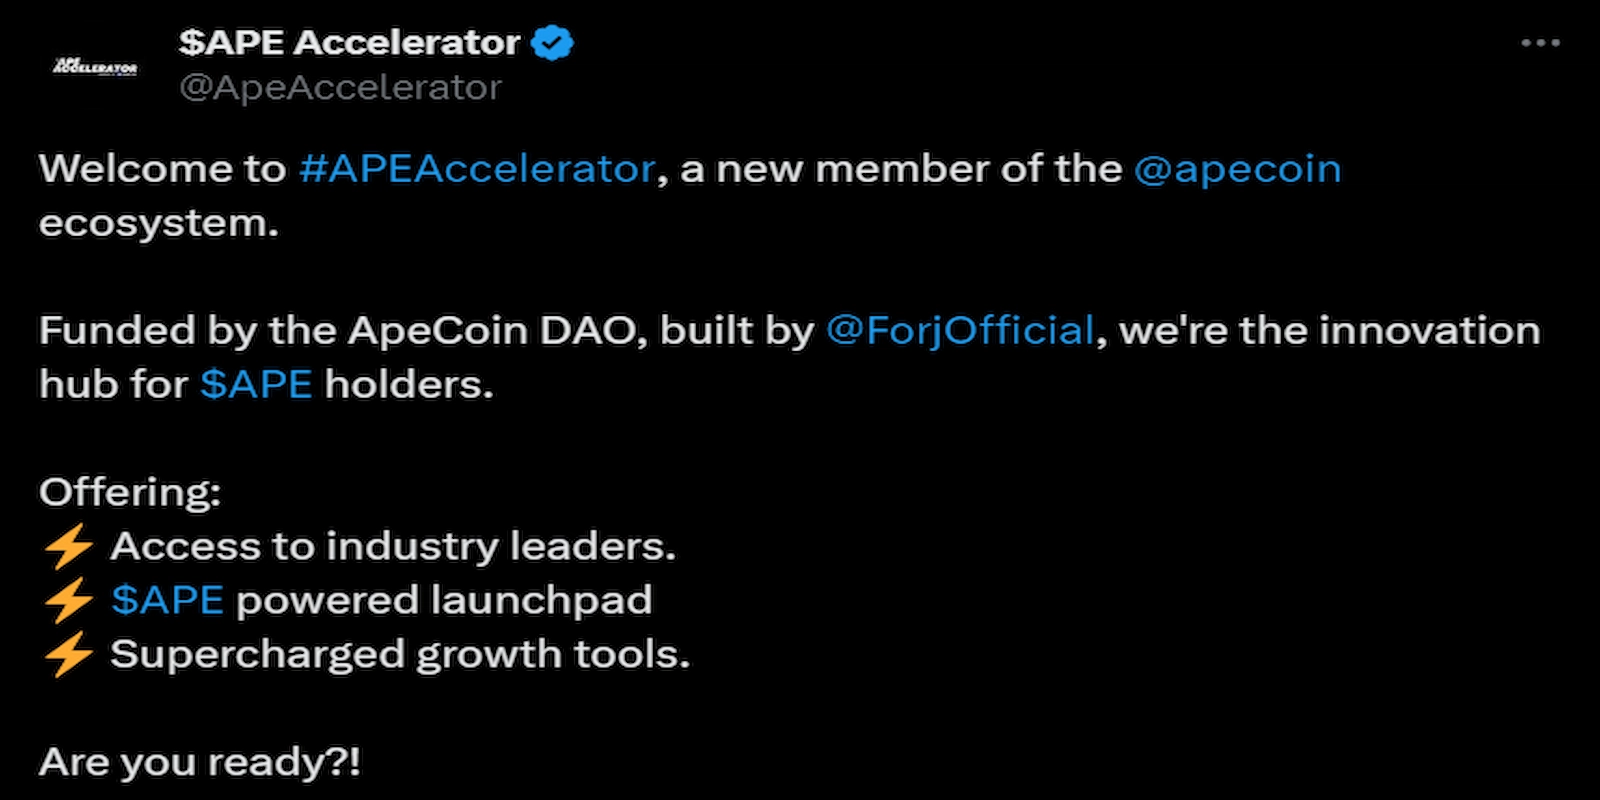 ApeCoin introduced the Ape Accelerator to its ecosystem.